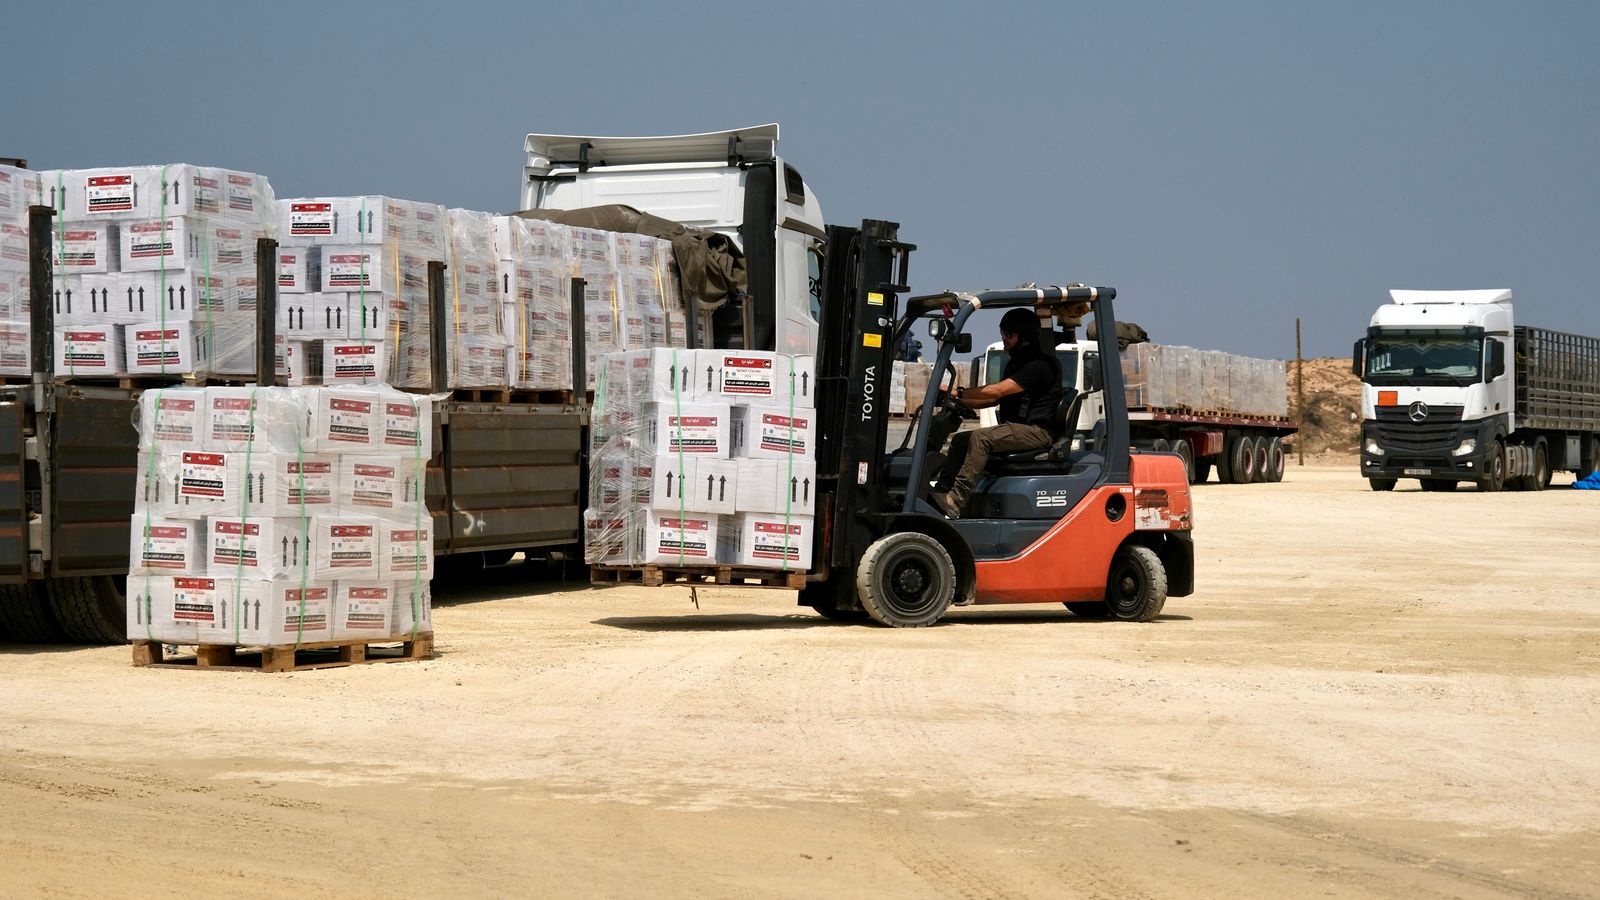 Aid passing through Gaza's 'lifeline' northern crossing at Erez for first time